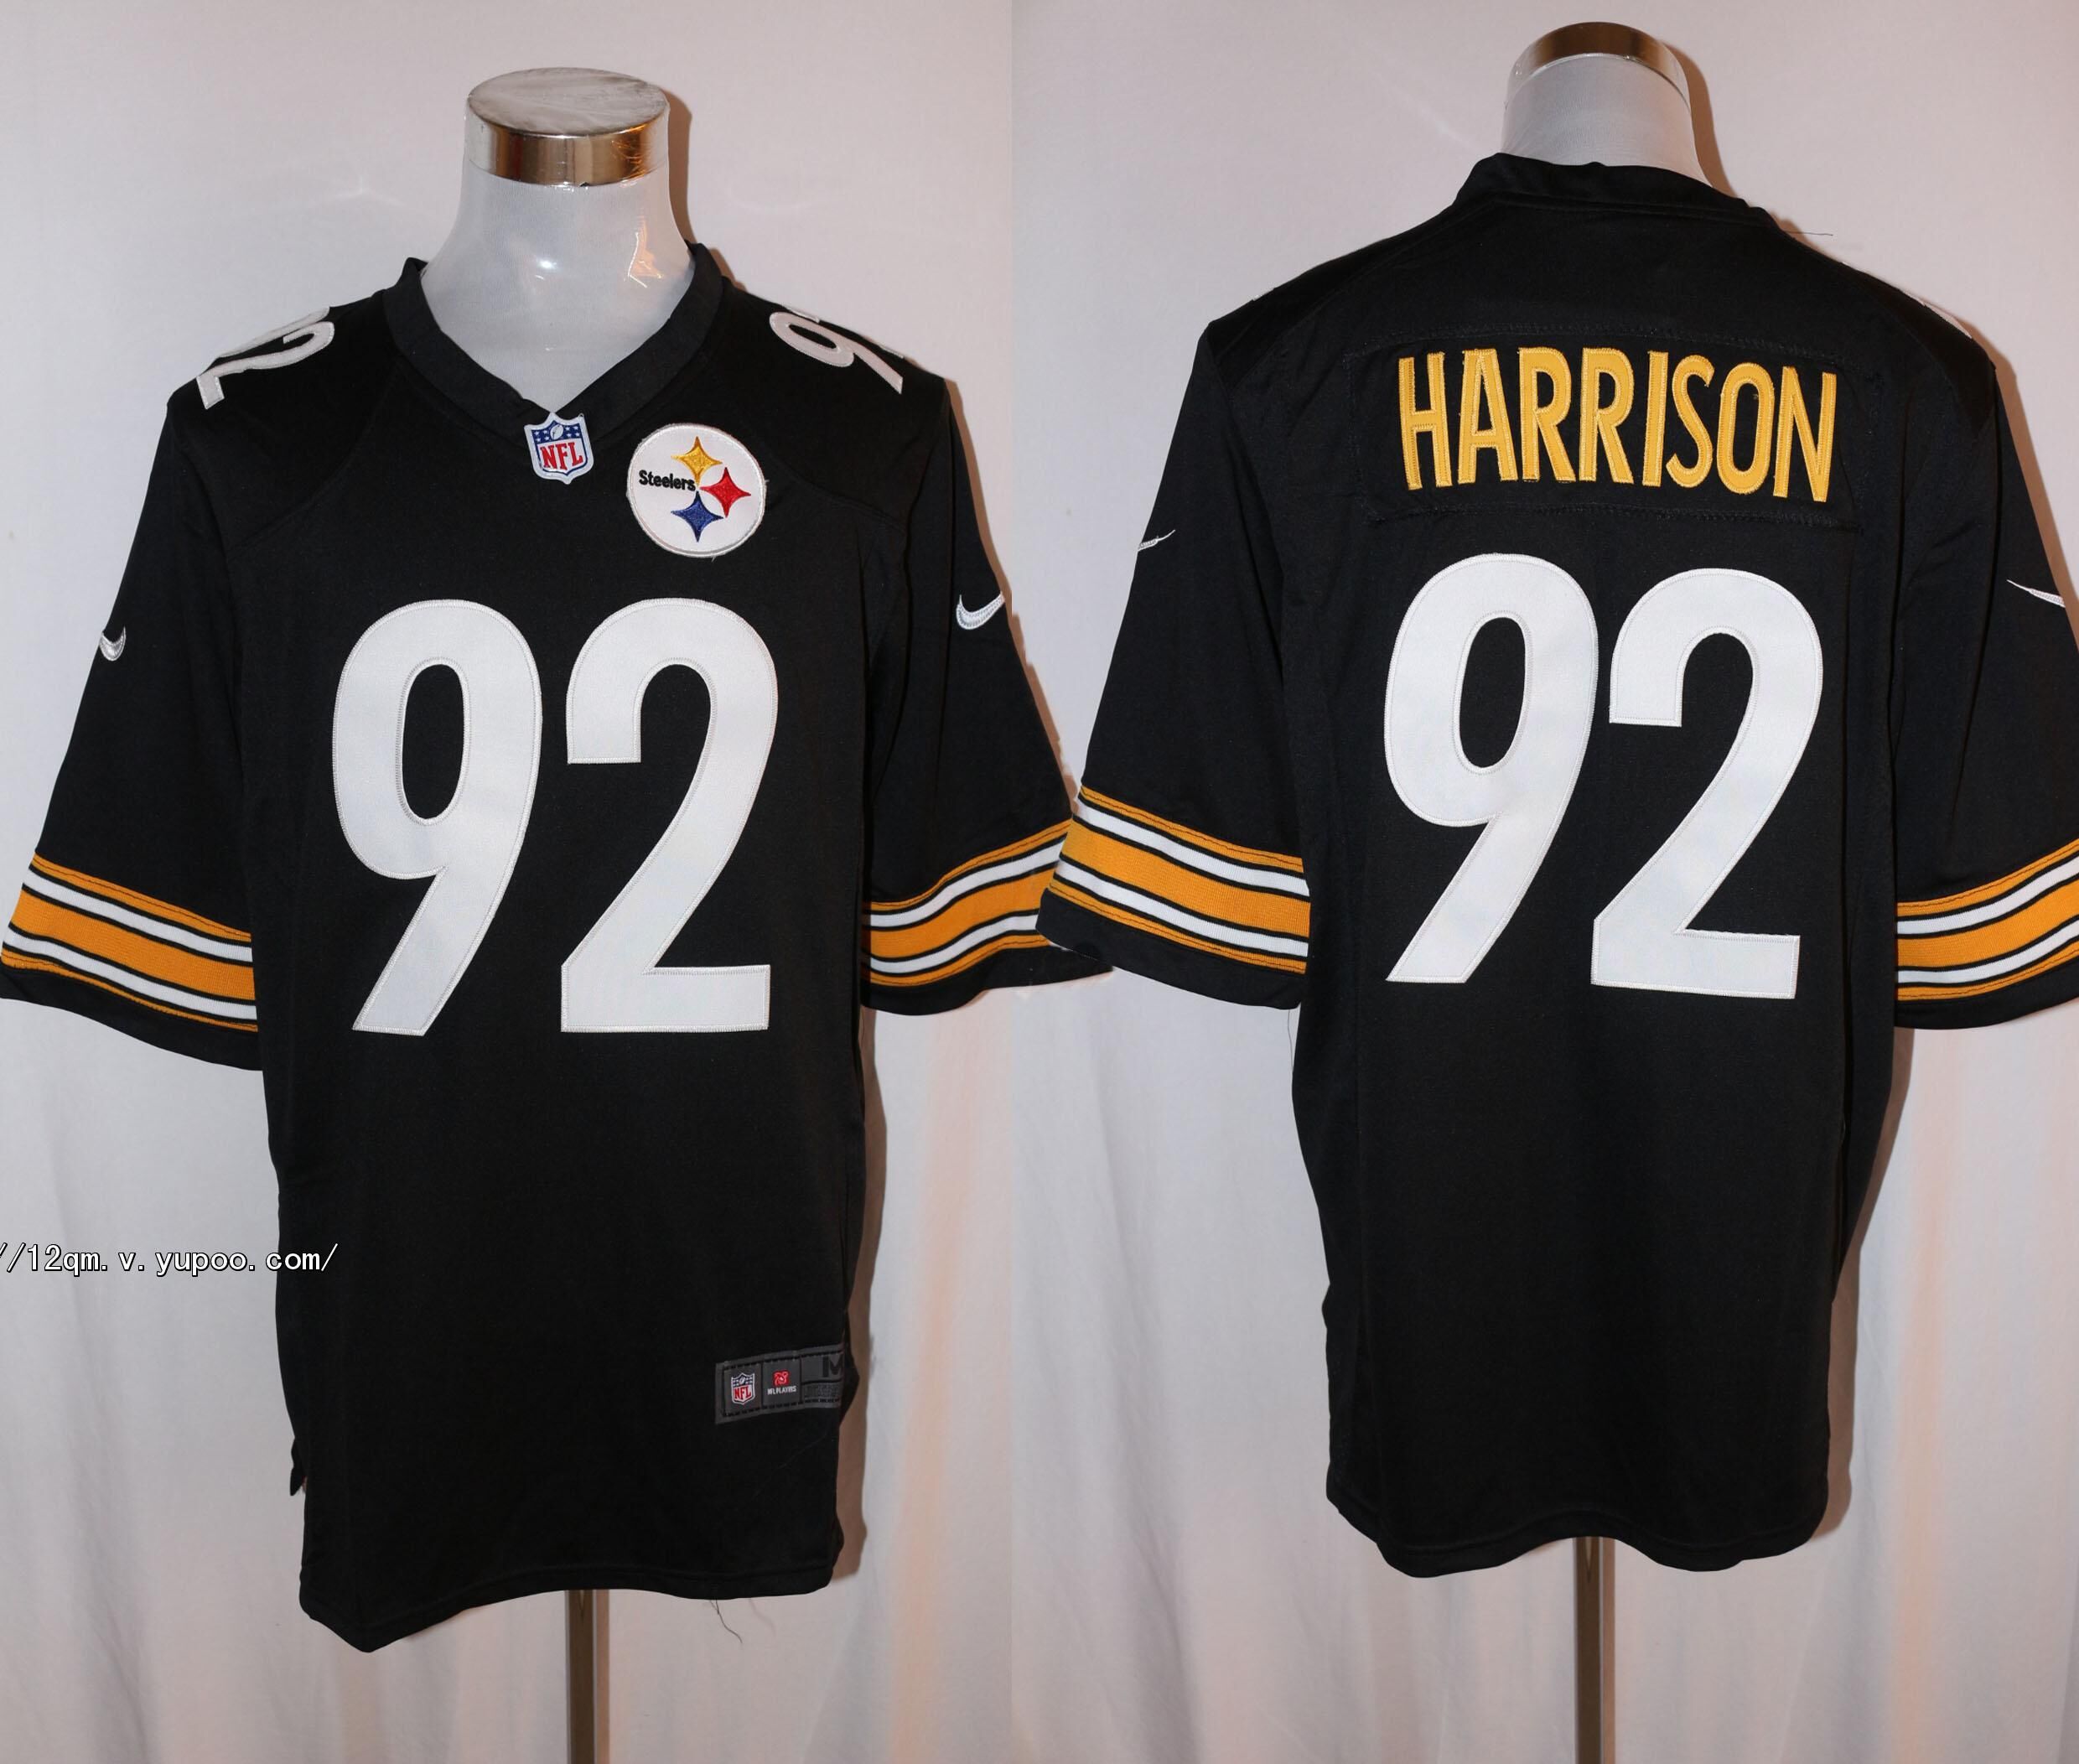 Pittsburgh Steelers #92 James Harrison Black Stitched Limited Nike Jersey